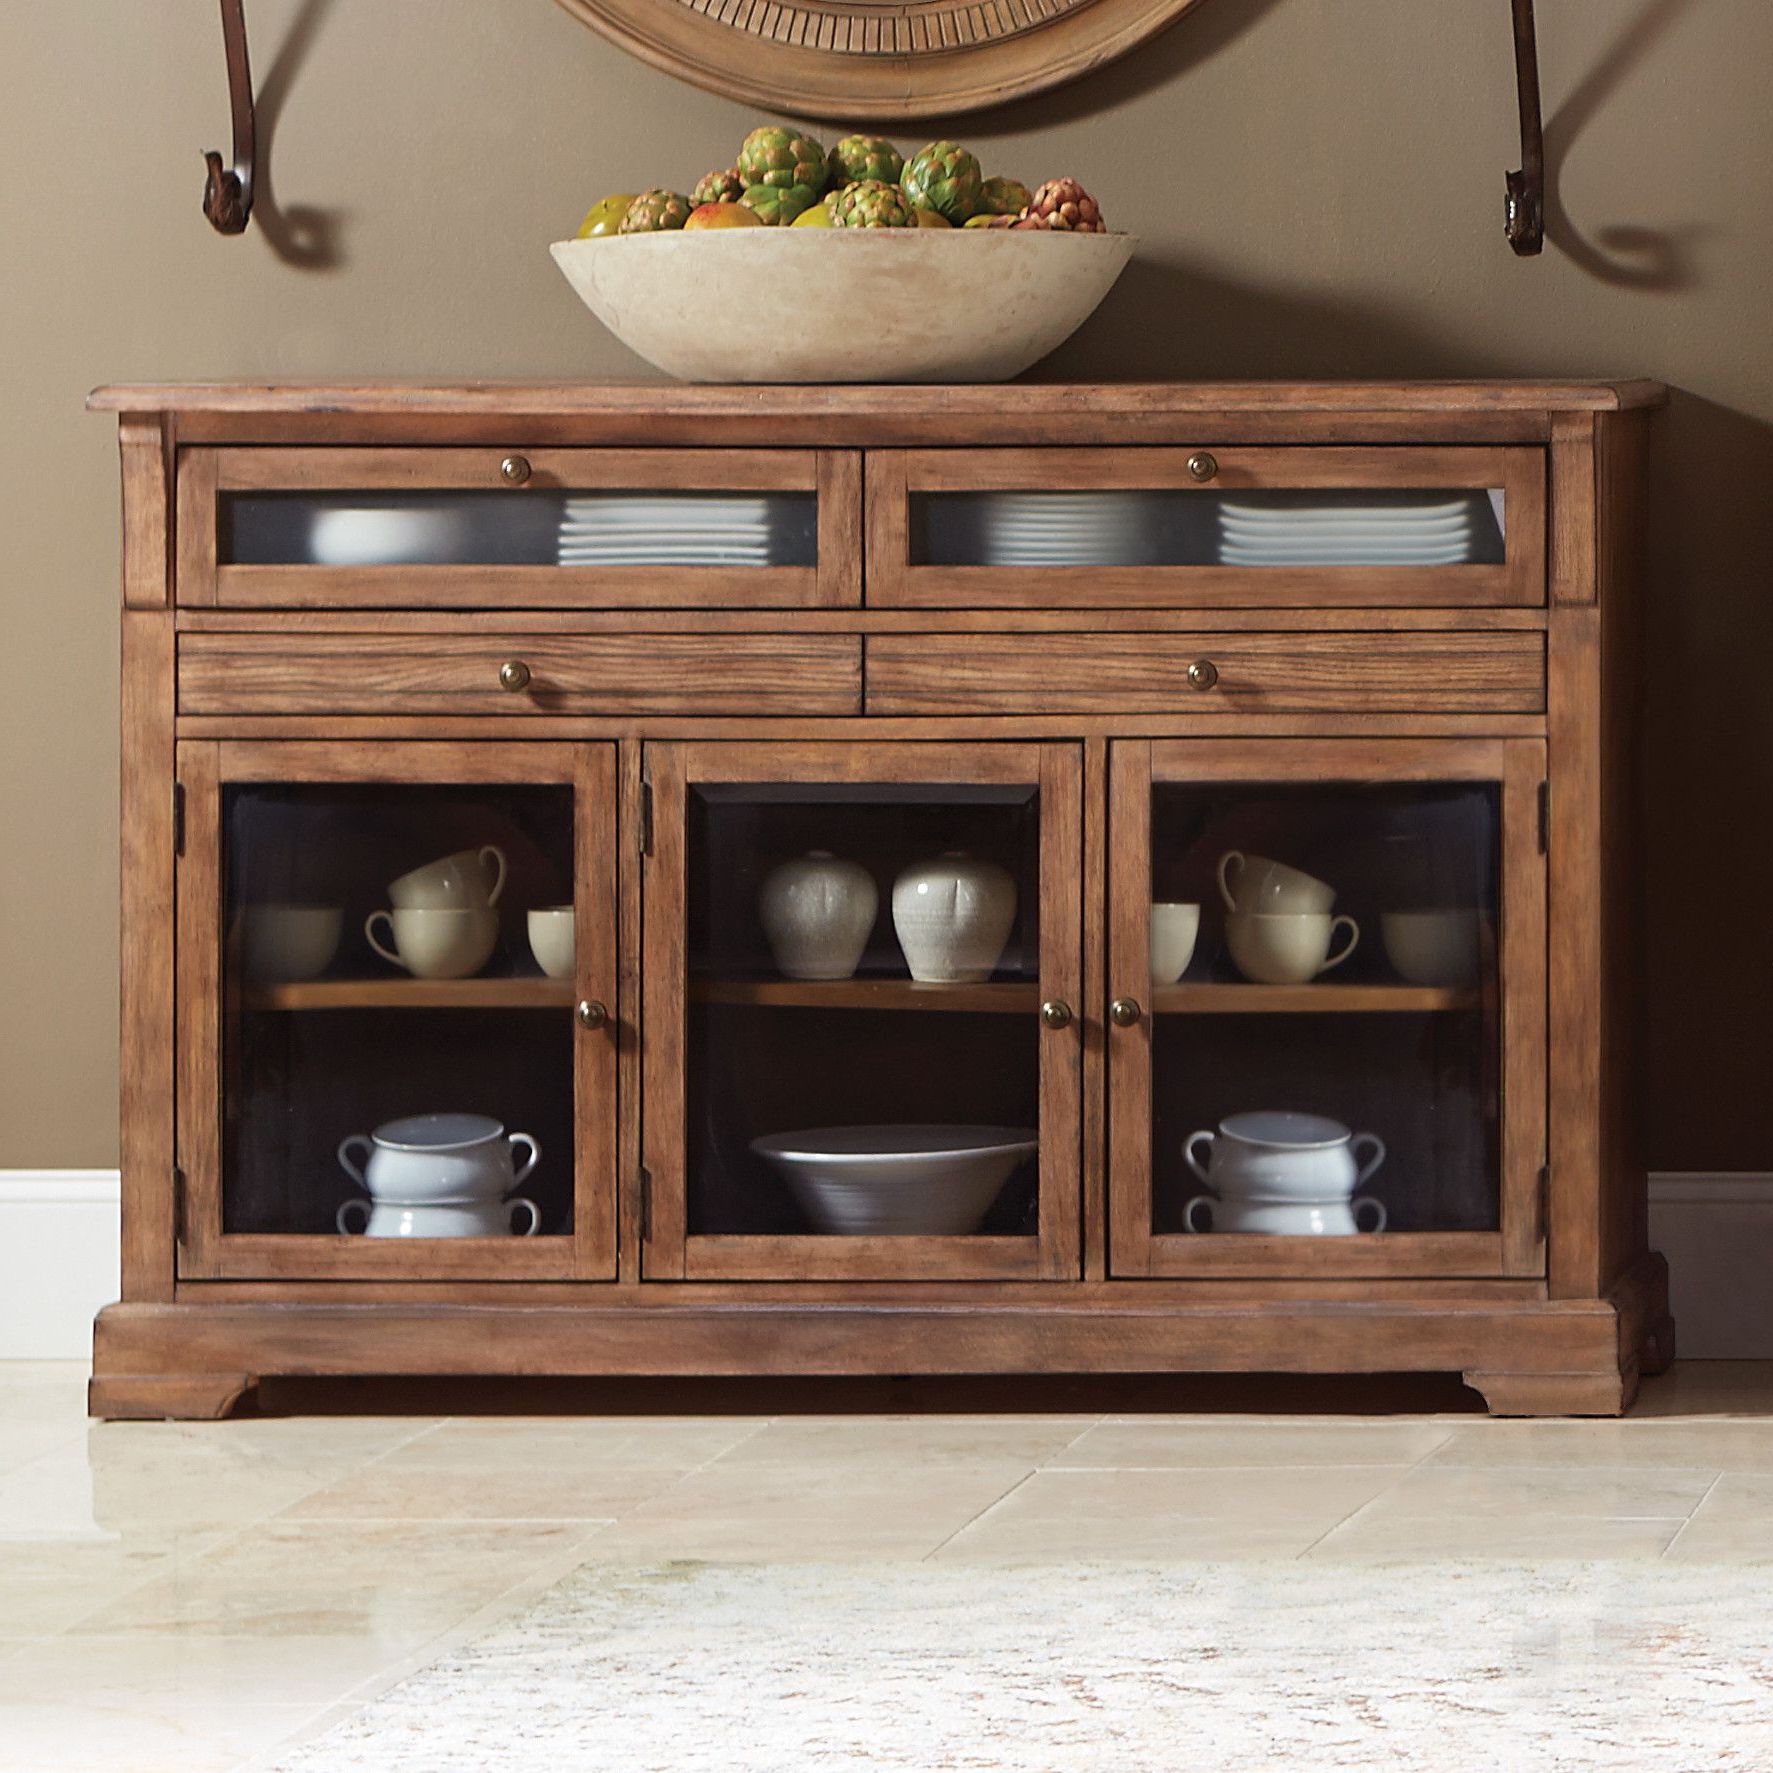 Sherborne Server | Products | Dining Room Server, Dining Pertaining To Chaffins Sideboards (View 12 of 20)